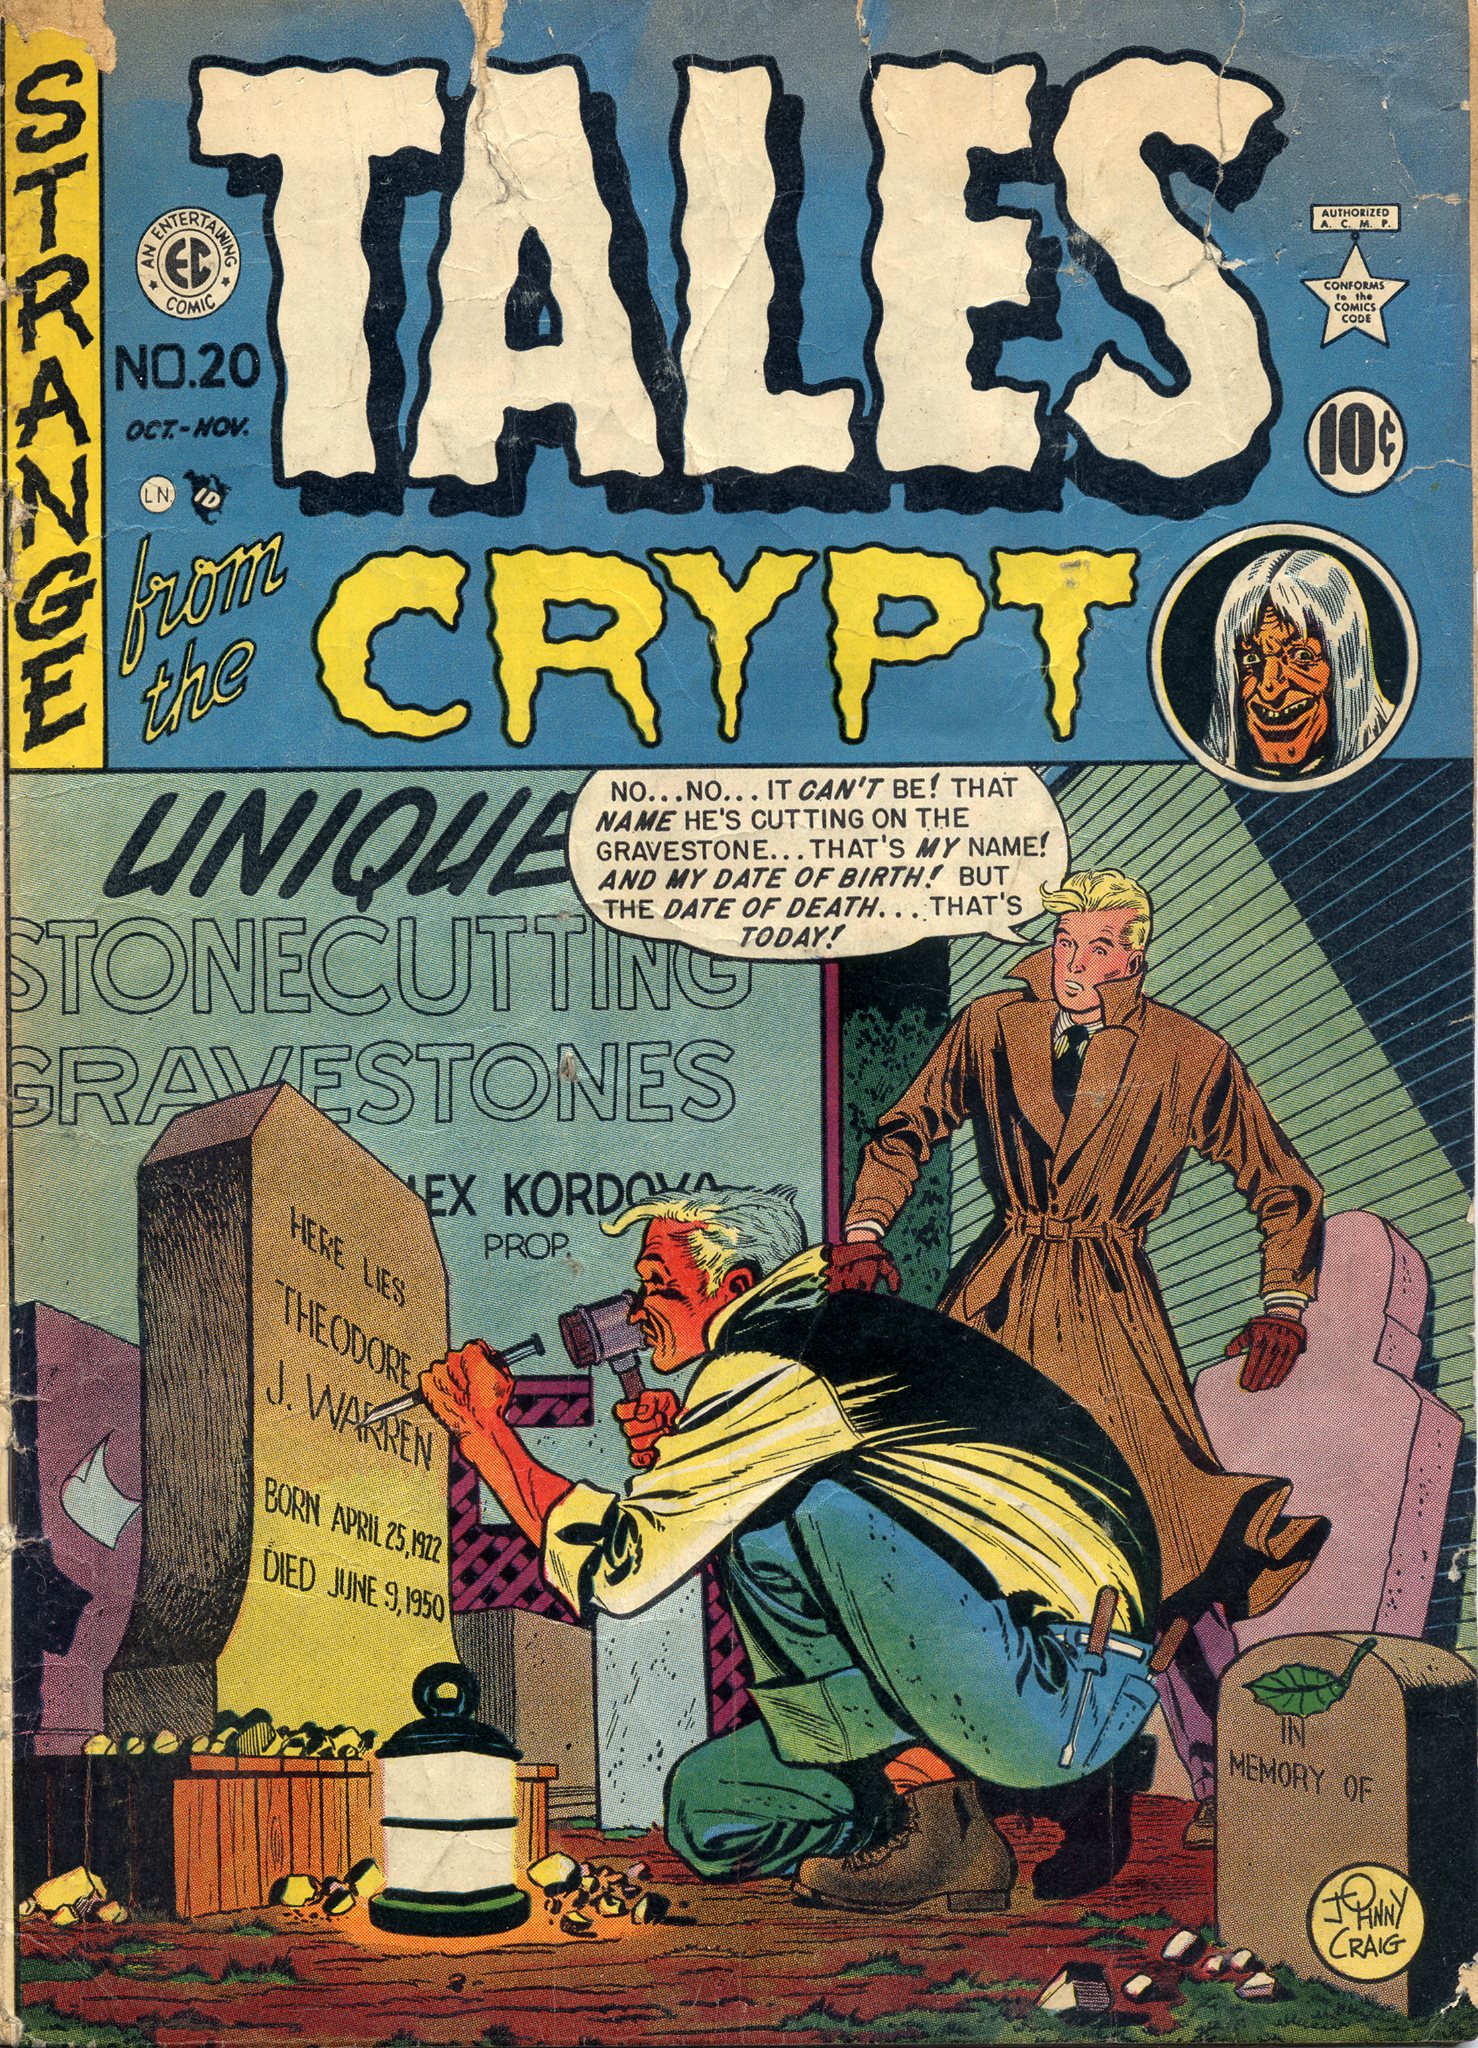 Tales from the Crypt Vol 1 20 | EC Comics Wiki | FANDOM powered by Wikia